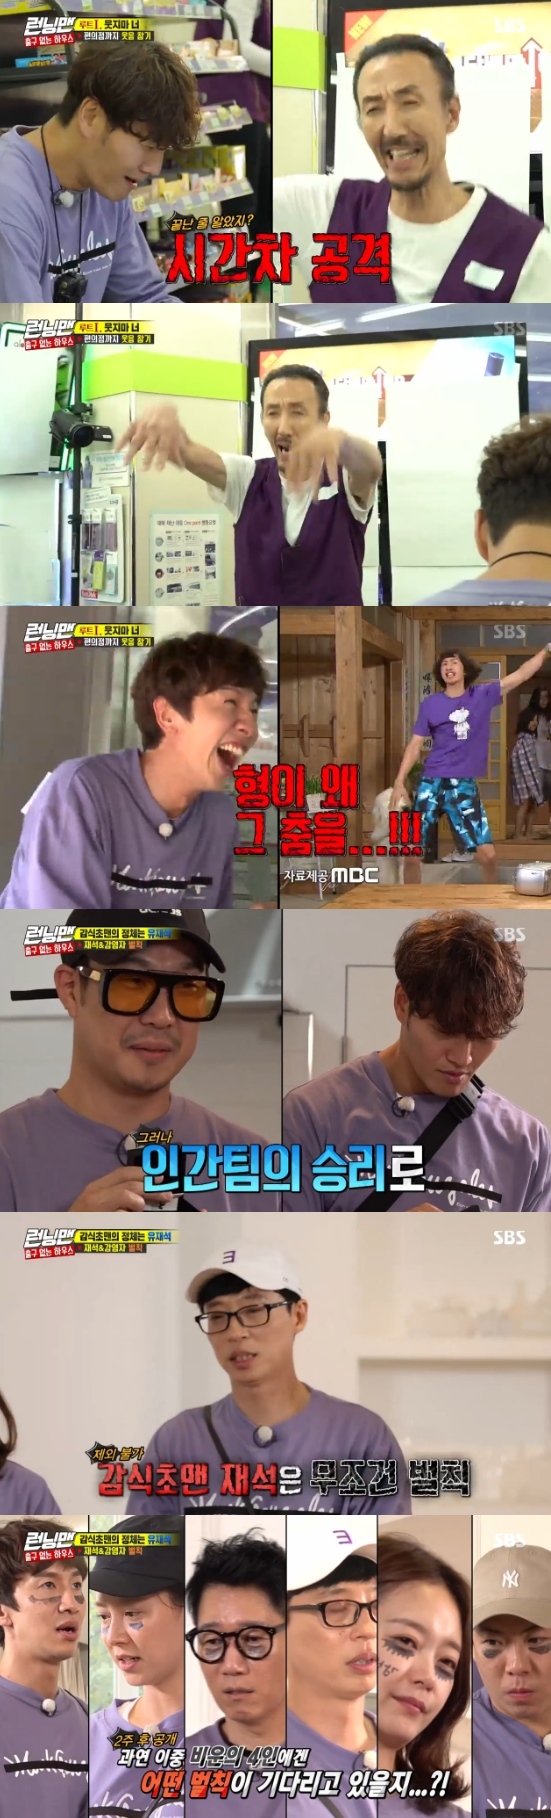 Running Man Kim Jong-kook won the human team Kim Jong-kook and Haha by in-N-Out Burgering the persimmon vinegar man Yoo Jae-Suk.On SBS Good Sunday - Running Man broadcasted on the 20th, Haha and Yoo Jae-Suk were shown suspicious of each other.The TV was on during the six-hour life planners day, and the news was that persimmon vinegar was spreading, so you should refrain from going out.If you carry out all the plan tables and in-N-Out Burger the persimmon vinegar man, the victory of the members who are not infected.One of the four routes outside the house can be used to Choices and perform missions, but when it fails, it is infected by persimmon vinegar.Infected members can infect other members by tearing their name tags with their mouths.The members asked to let out the prime suspect, Ji Suk-jin. Haha laughed, saying, When we come back as an Infector, we just have to be sorry.Members continued to speak to Ji Suk-jin about the requirements, and Ji Suk-jin, who did not hear, shouted, OK, stop it.Out, Ji Suk-jin choices a cell phone containing Route 1 of four cell phones.Mission is Do not laugh, and if you do not laugh at convenience stores, you will not be infected.Ji Suk-jin was confident that the mission was easy, but soon a student dressed up appeared and was in crisis.Next up is Mr. Boung-Bang, who dressed up as Yondu. Ji Suk-jin burst into a laugh he endured. Infected Ji Suk-jin will infect everything.Ji Suk-jin played zombie, but the members snorted.As Ji Suk-jin approached, Lee Kwang-soo ripped off the name tag, and Ji Suk-jin did not move for five minutes.Then, when Ji Suk-jin tried to open the Yoo Jae-Suk name tag, Lee Kwang-soo set the cell phone alarm every five minutes.But Ji Suk-jin soon ripped off the name tag for Jeon So-min.Kim Jong-kook, Lee Kwang-soos challenge following Yang Se-chanThey tried to hold back laughter, slapping each other to the cheeks, but Lee Kwang-soo laughed as soon as they entered stage 5. Han Ki-beom was waiting.Kim Jong-kook succeeded in the mission by holding back laughter until the end.Members who later exhausted the former route received a water gun: a persimmon vinegarmans face could lead to an In-N-Out Burger; and a water gunman, Kim Jong-kook, was the one who shot the water gun.Kim Jong-kook chose Yoo Jae-Suk, and fortunately Yoo Jae-Suk was a persimmon vinegar man.Photo = SBS Broadcasting Screen